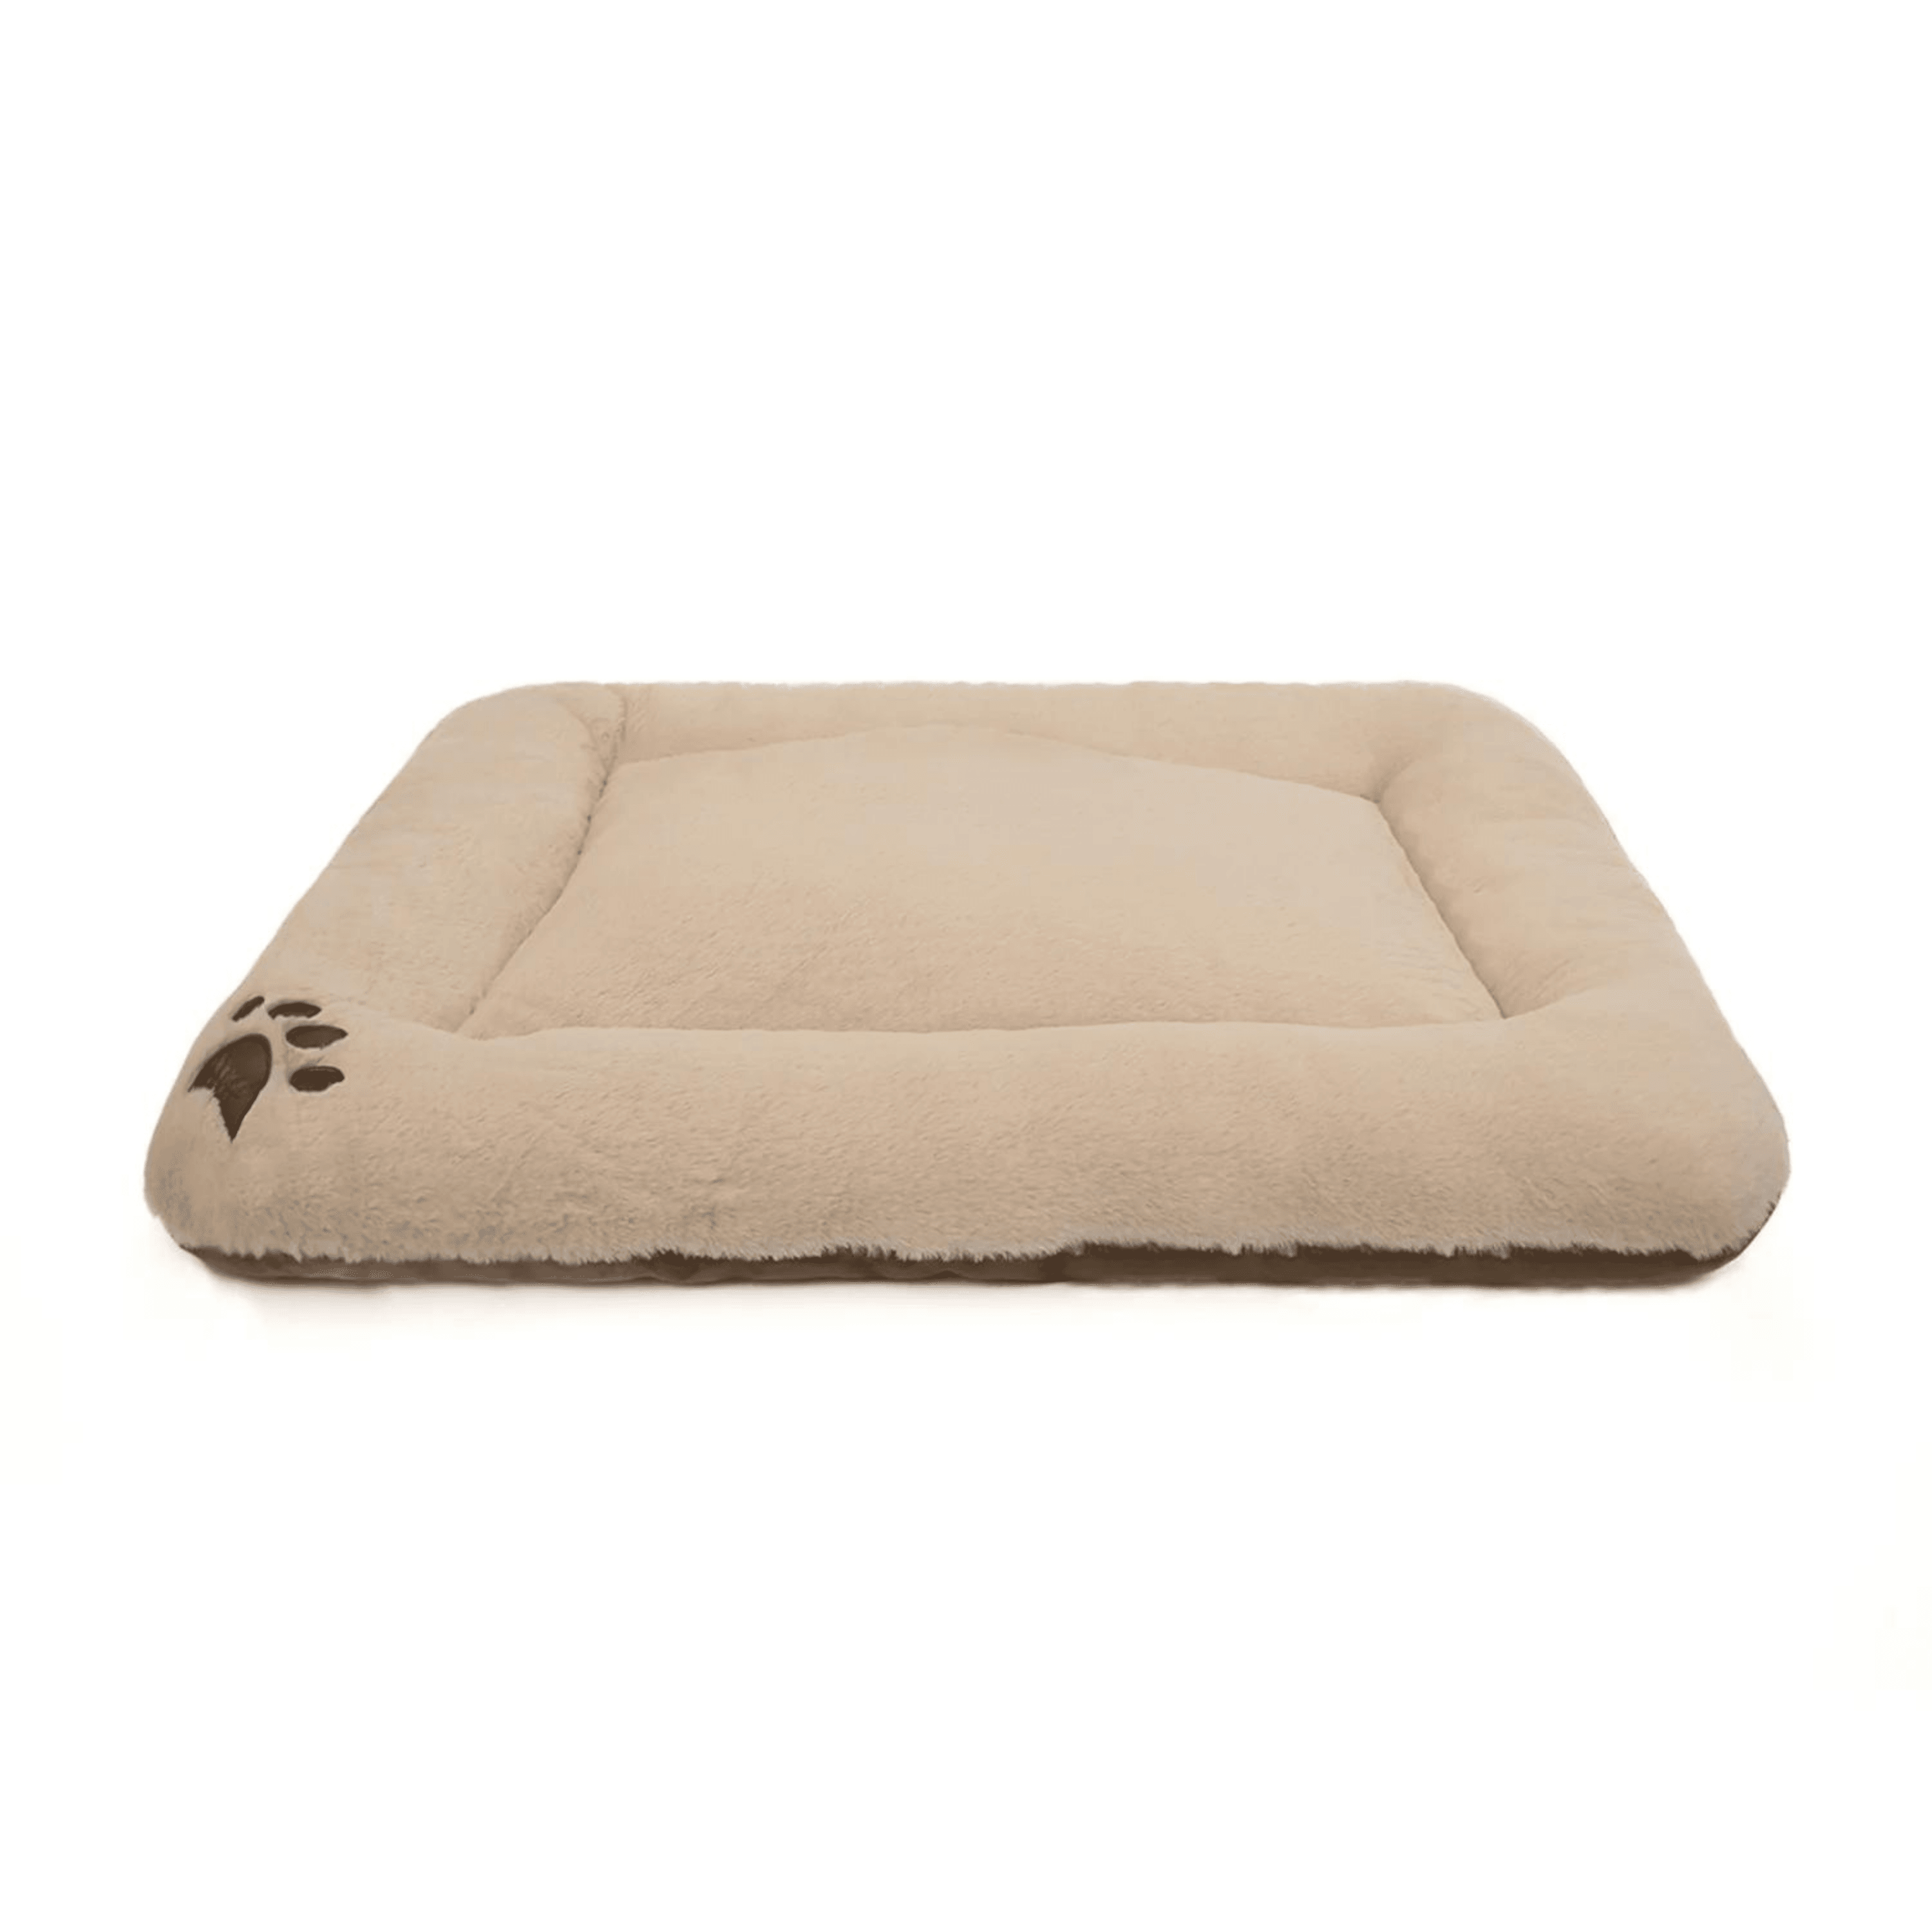 Puffy High Quality Dog Bed | Cat Bed | Pet Bed